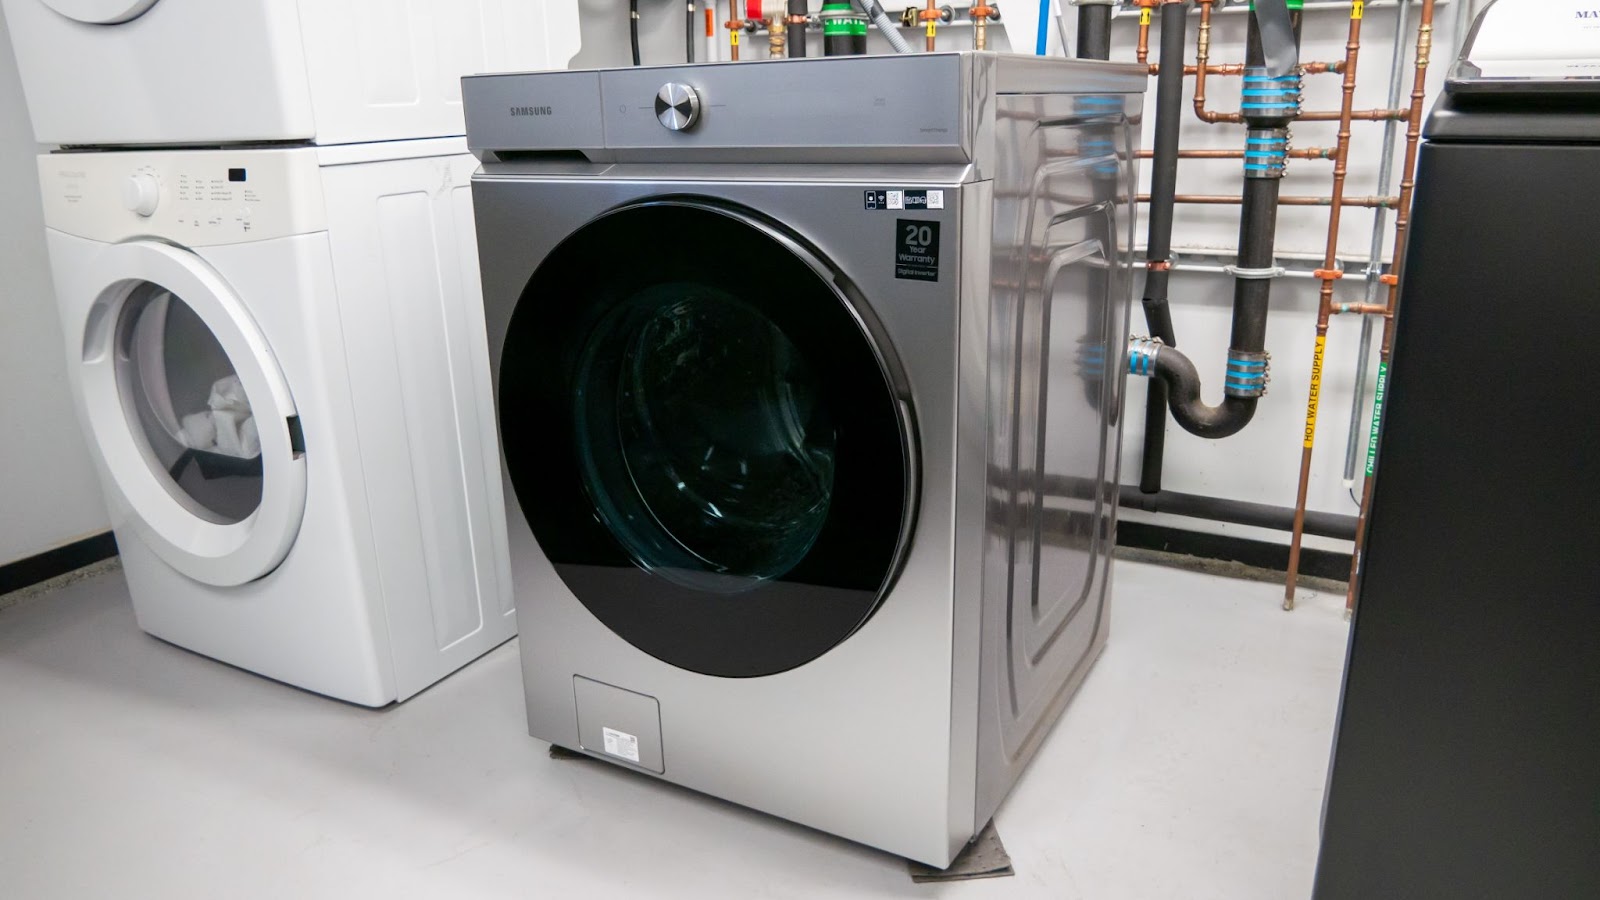 The Samsung WF53BB8700AT washer set up in our laundry testing lab.